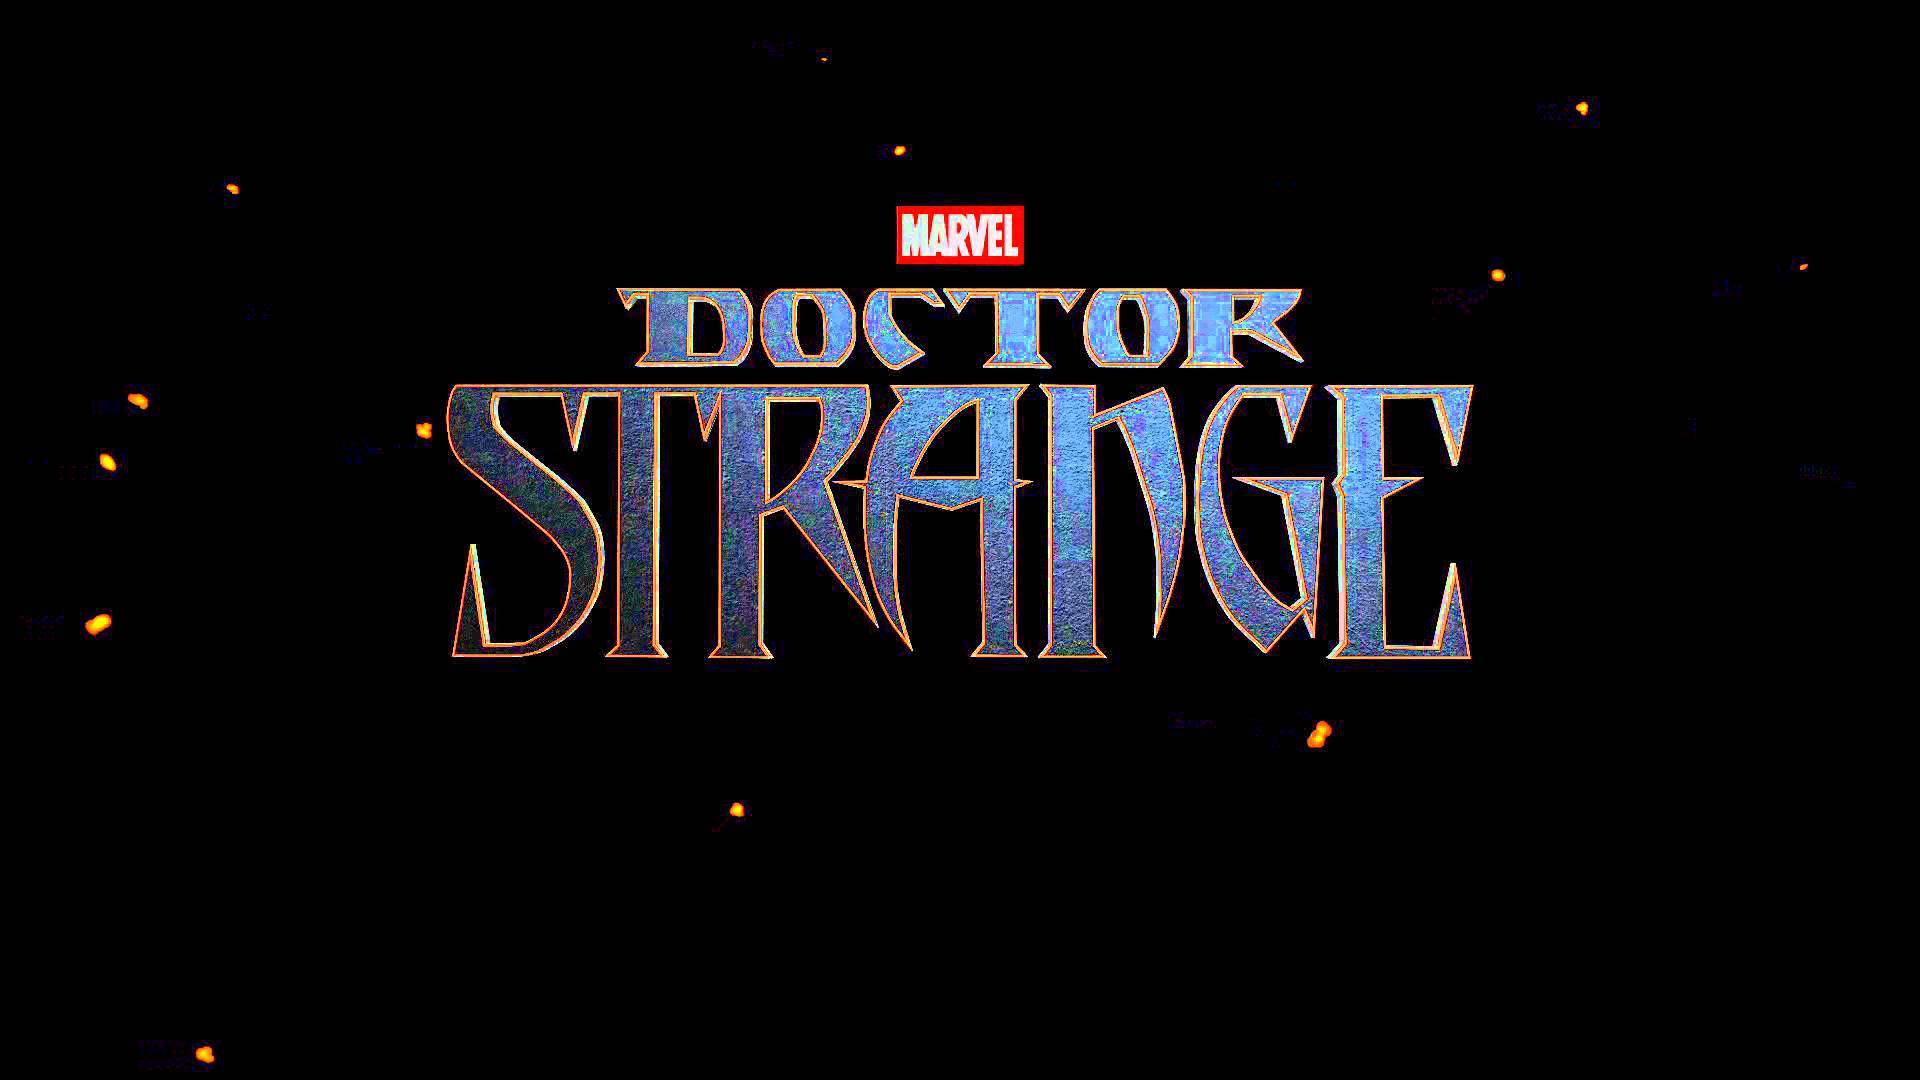 Doctor Strange 2016 Movies Images Photos Pictures Backgrounds